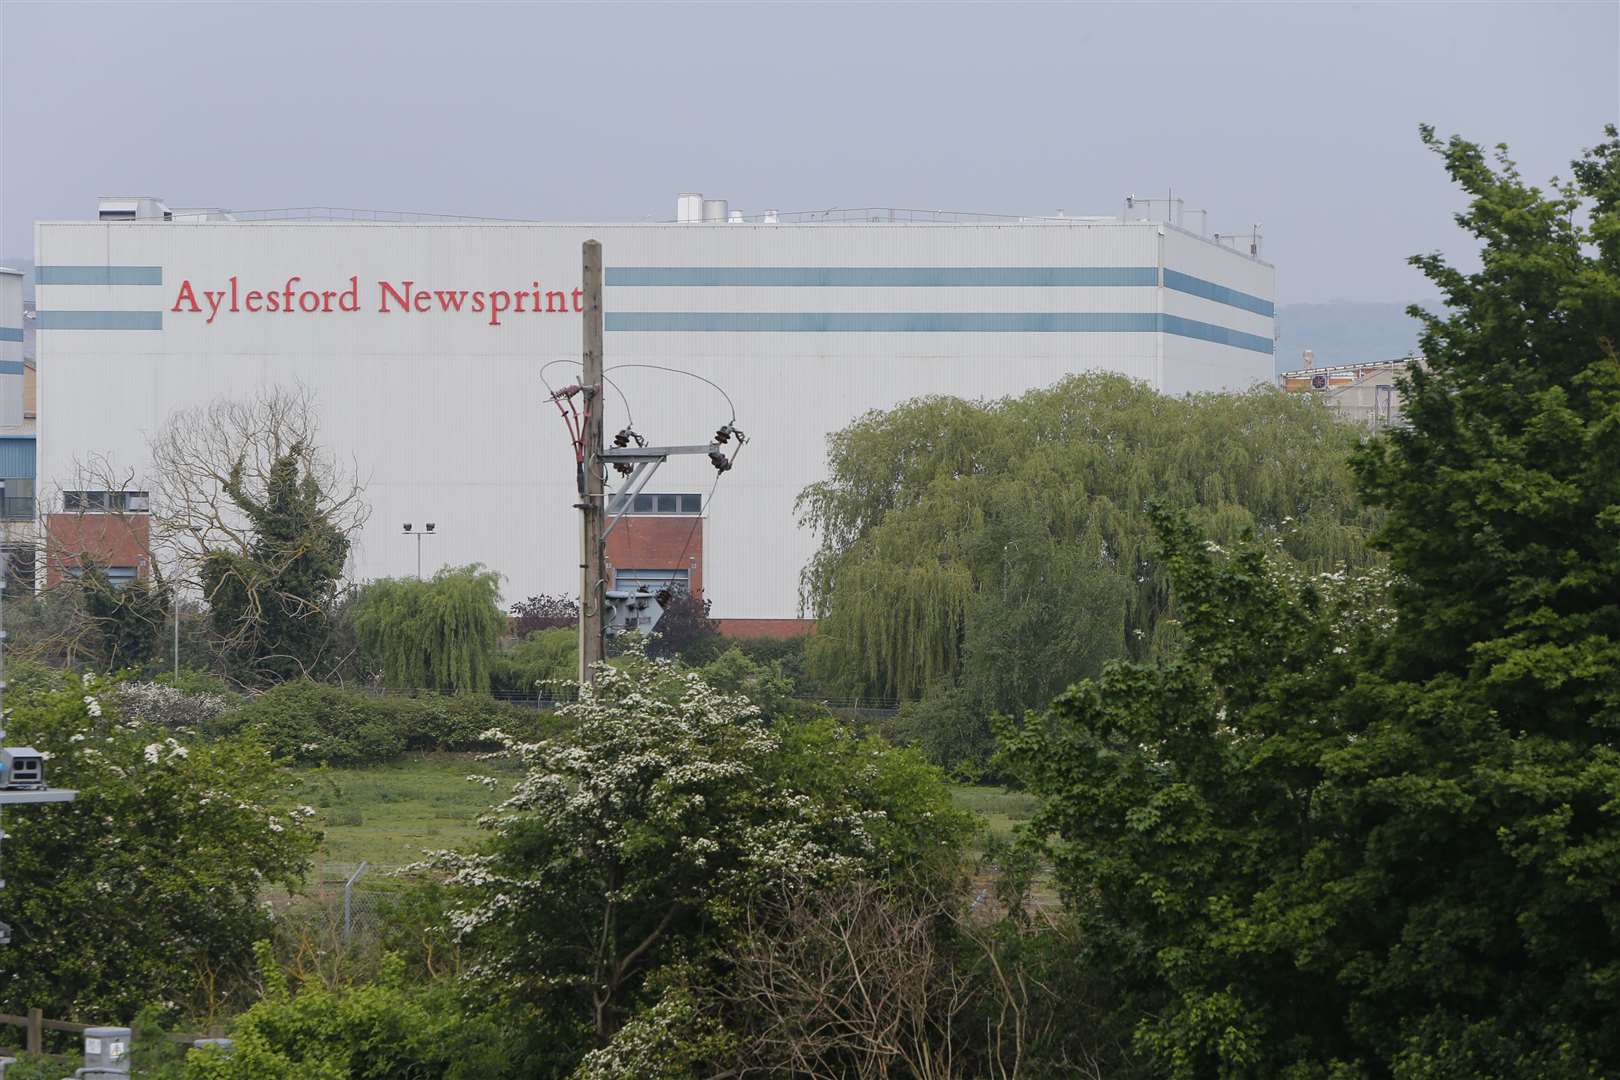 Aylesford Newsprint closed in 2015 with the loss of more than 230 jobs